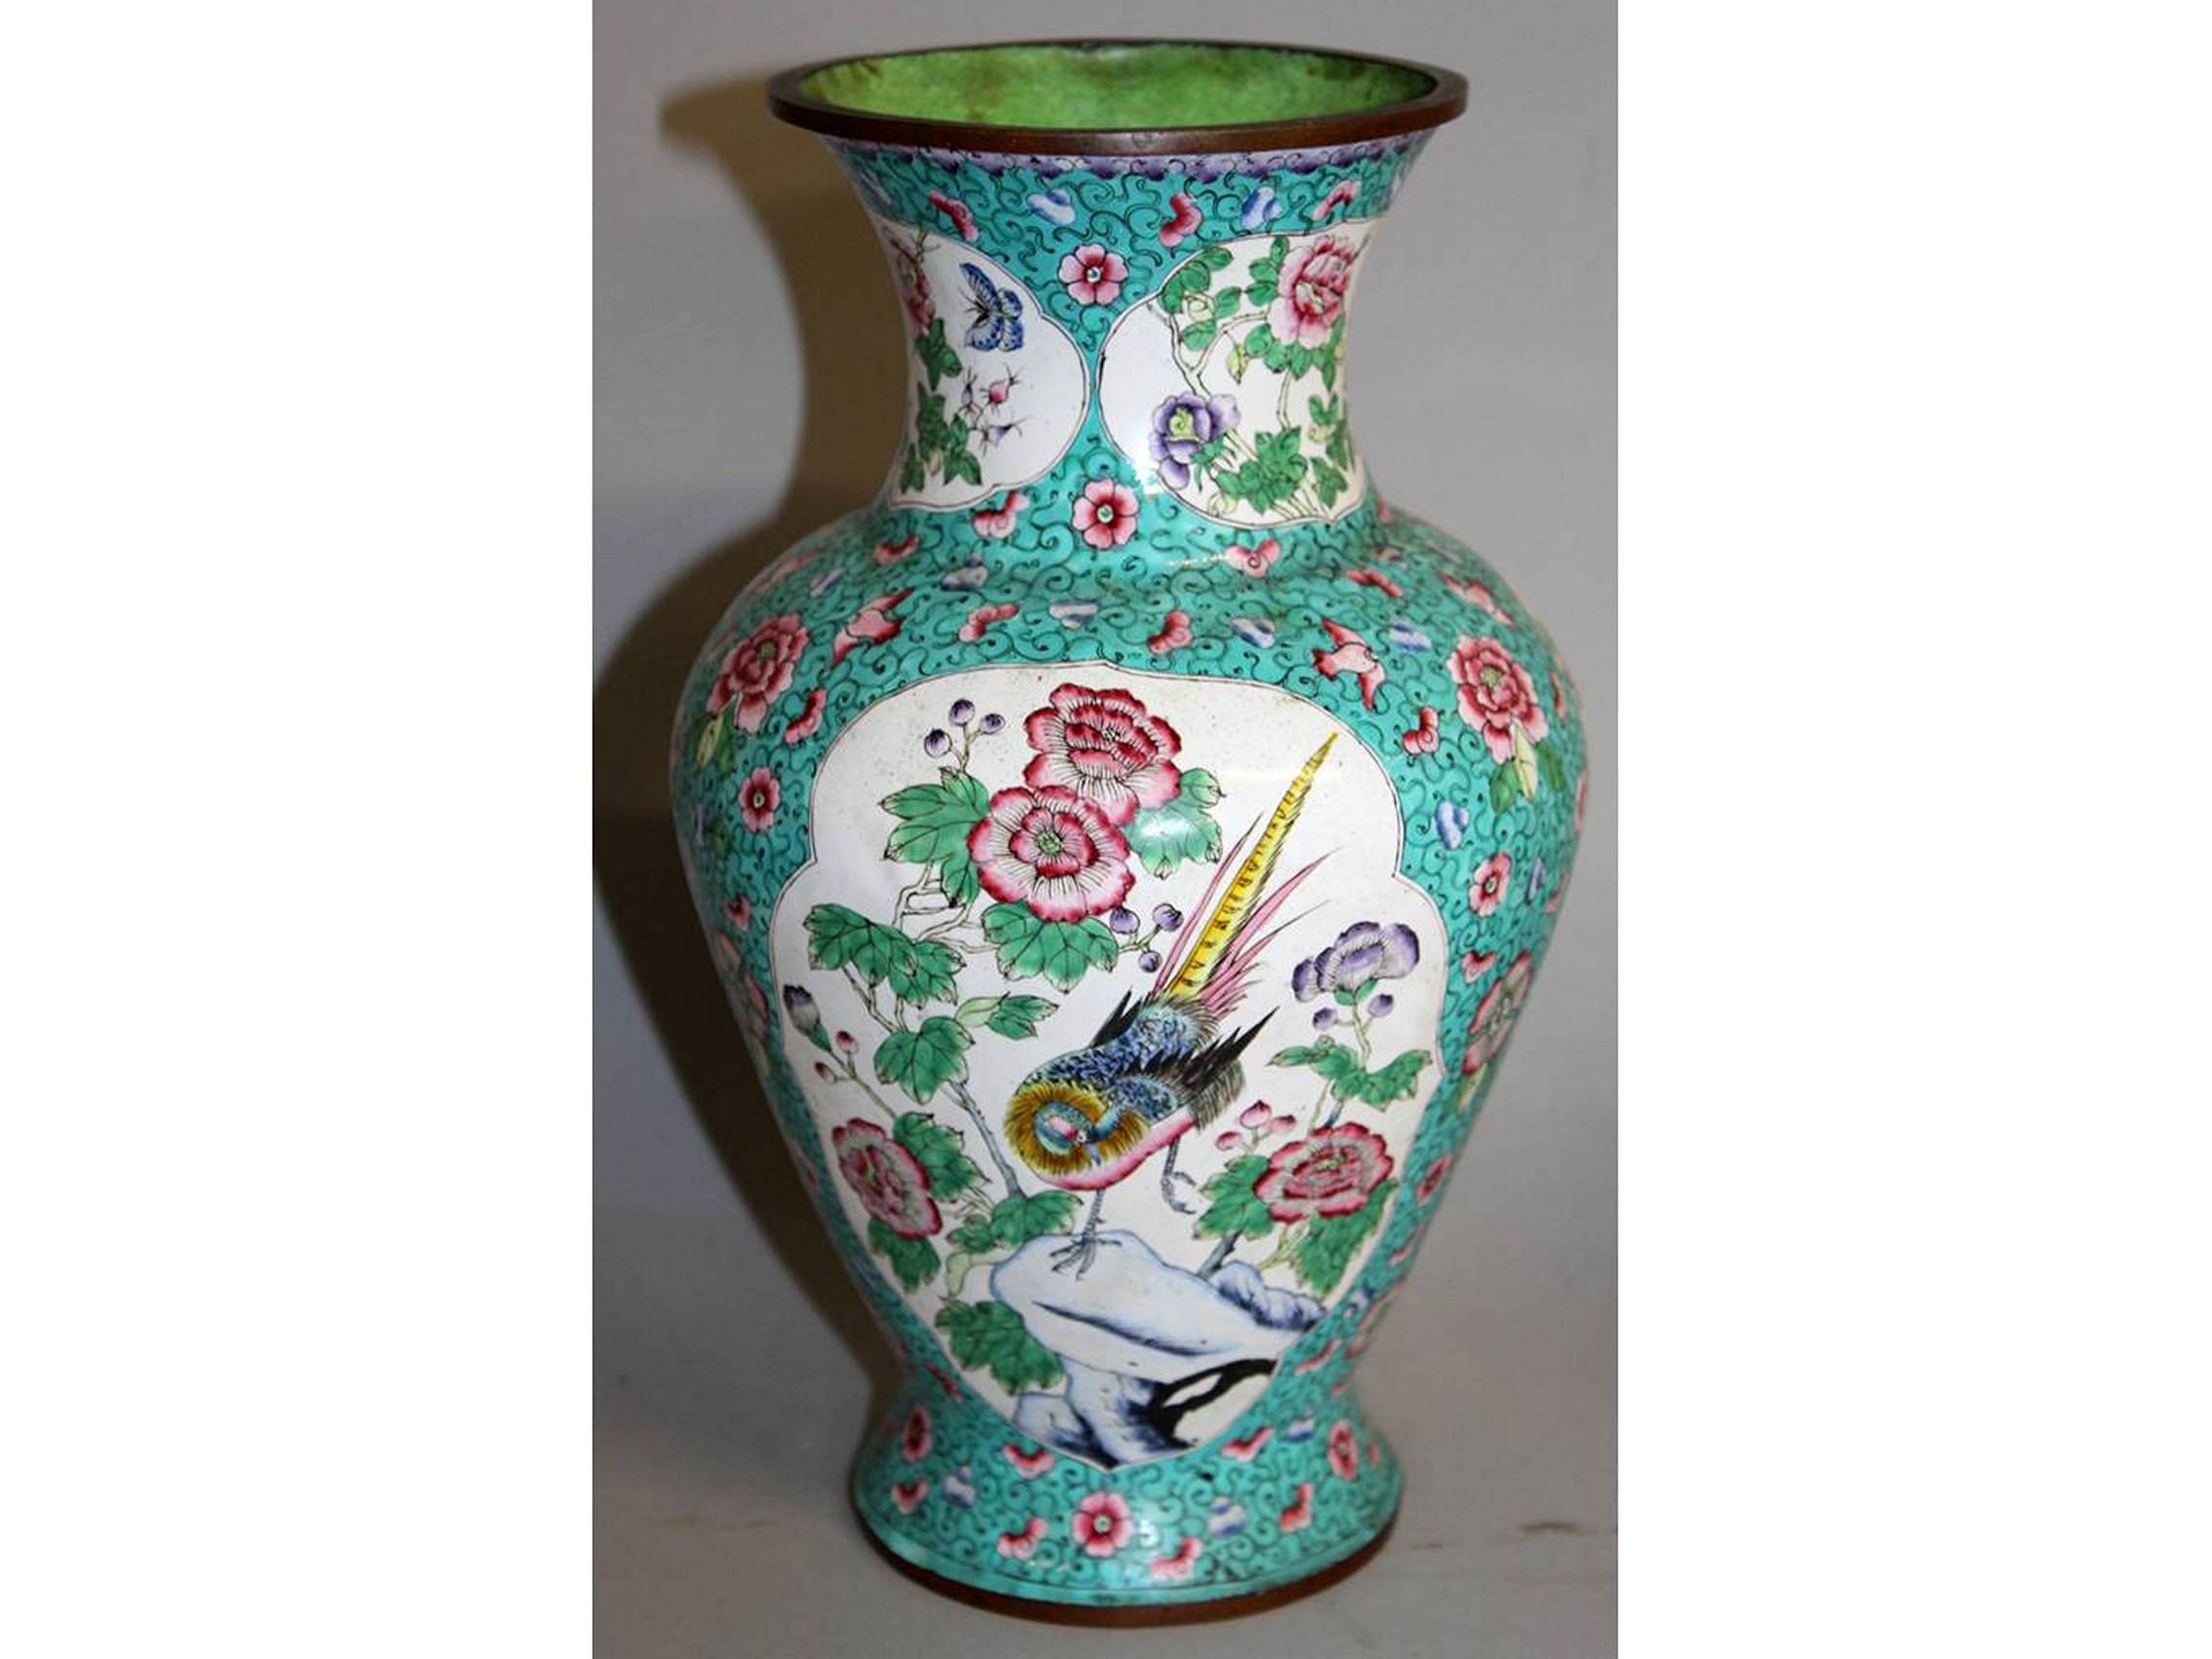 AN EARLY 20TH CENTURY CHINESE CANTON ENAMEL VASE, the sides decorated with shaped panels of birds